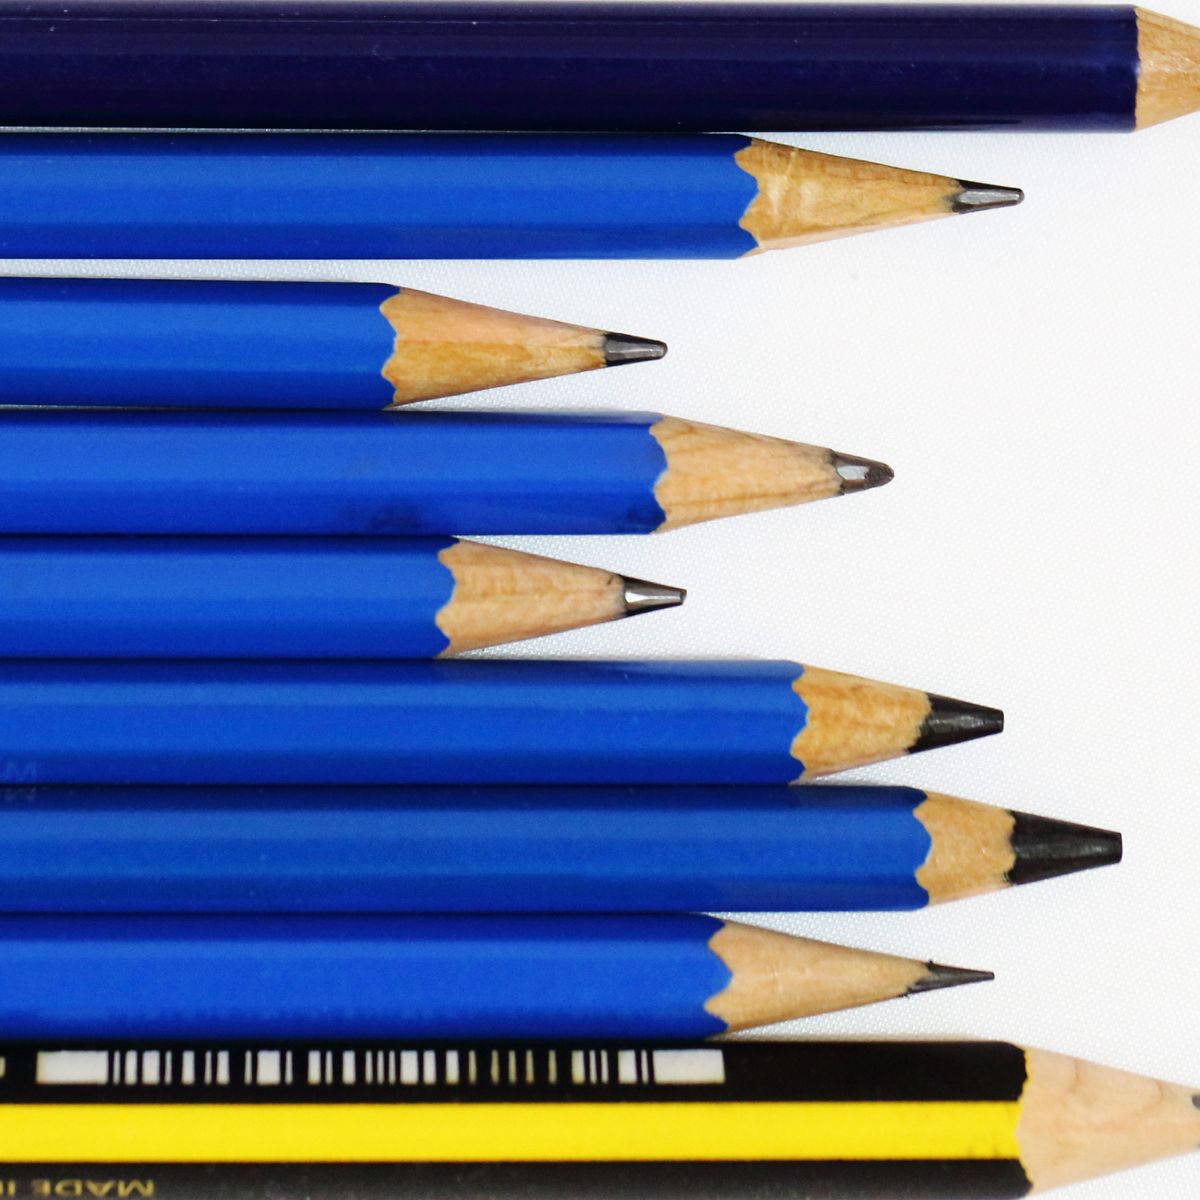 Best Pencils for Artists - 2019 | The Strategist